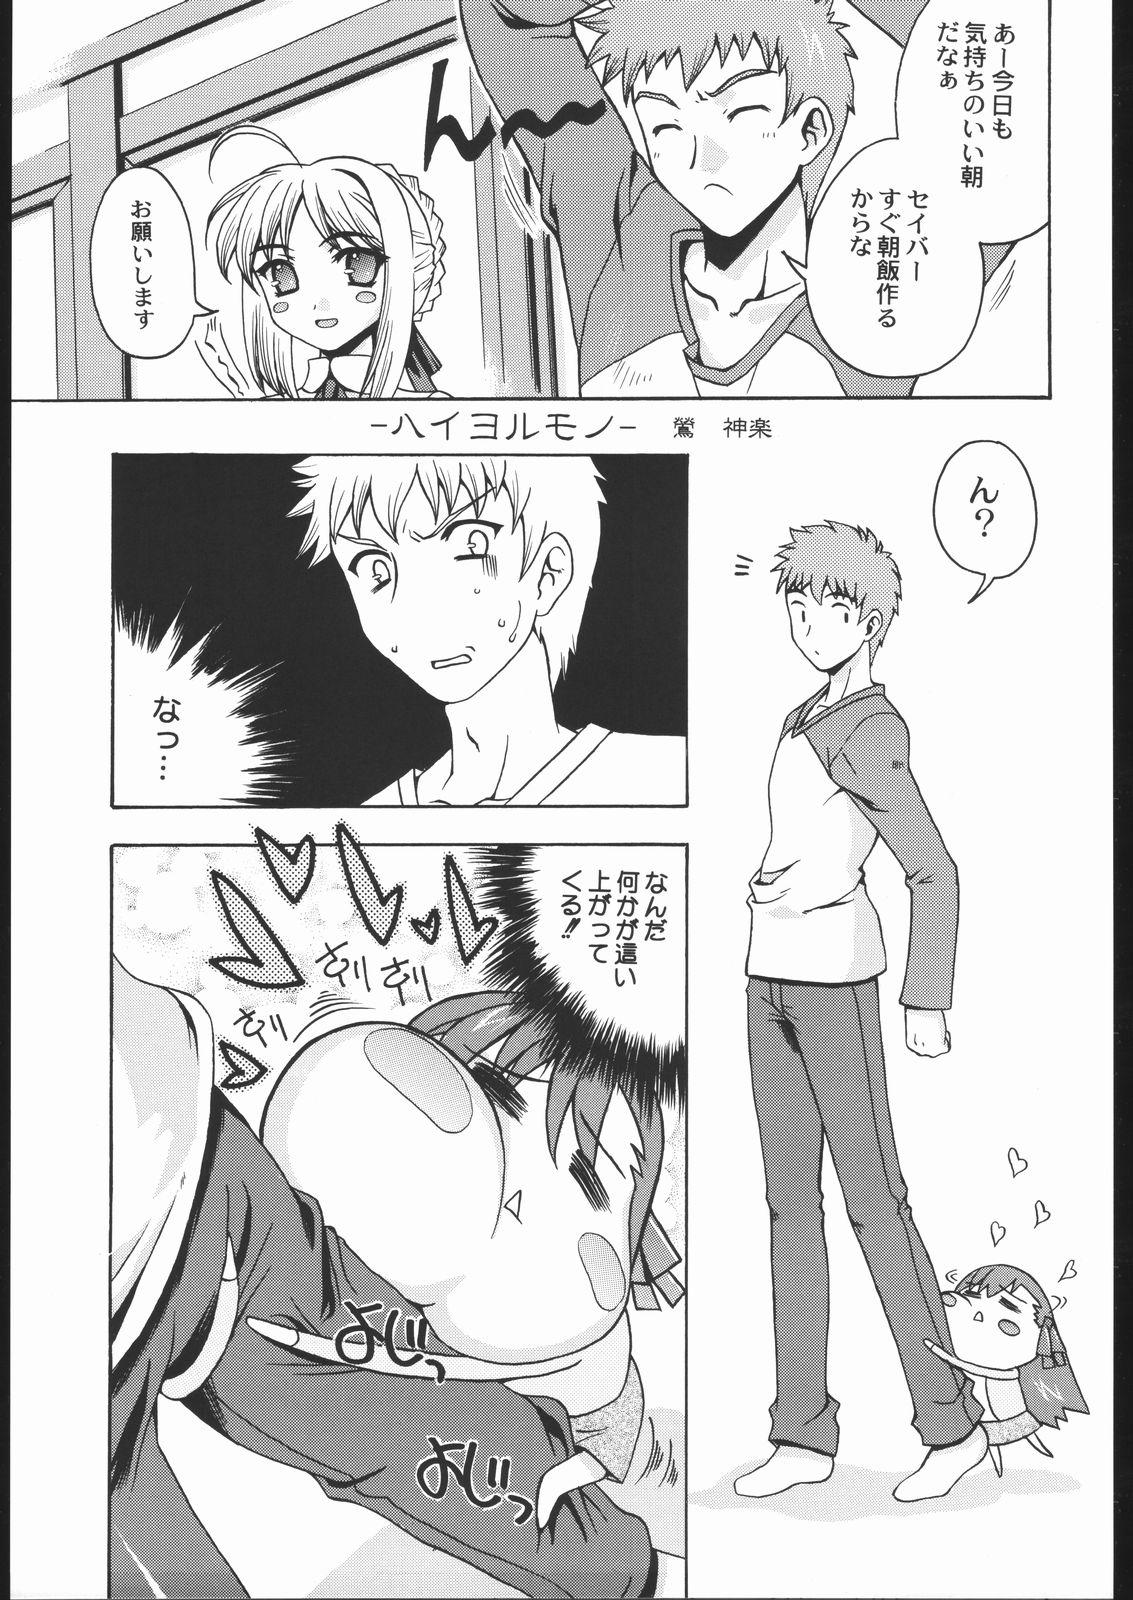 Oldvsyoung Going My Way - Fate stay night Coeds - Page 4